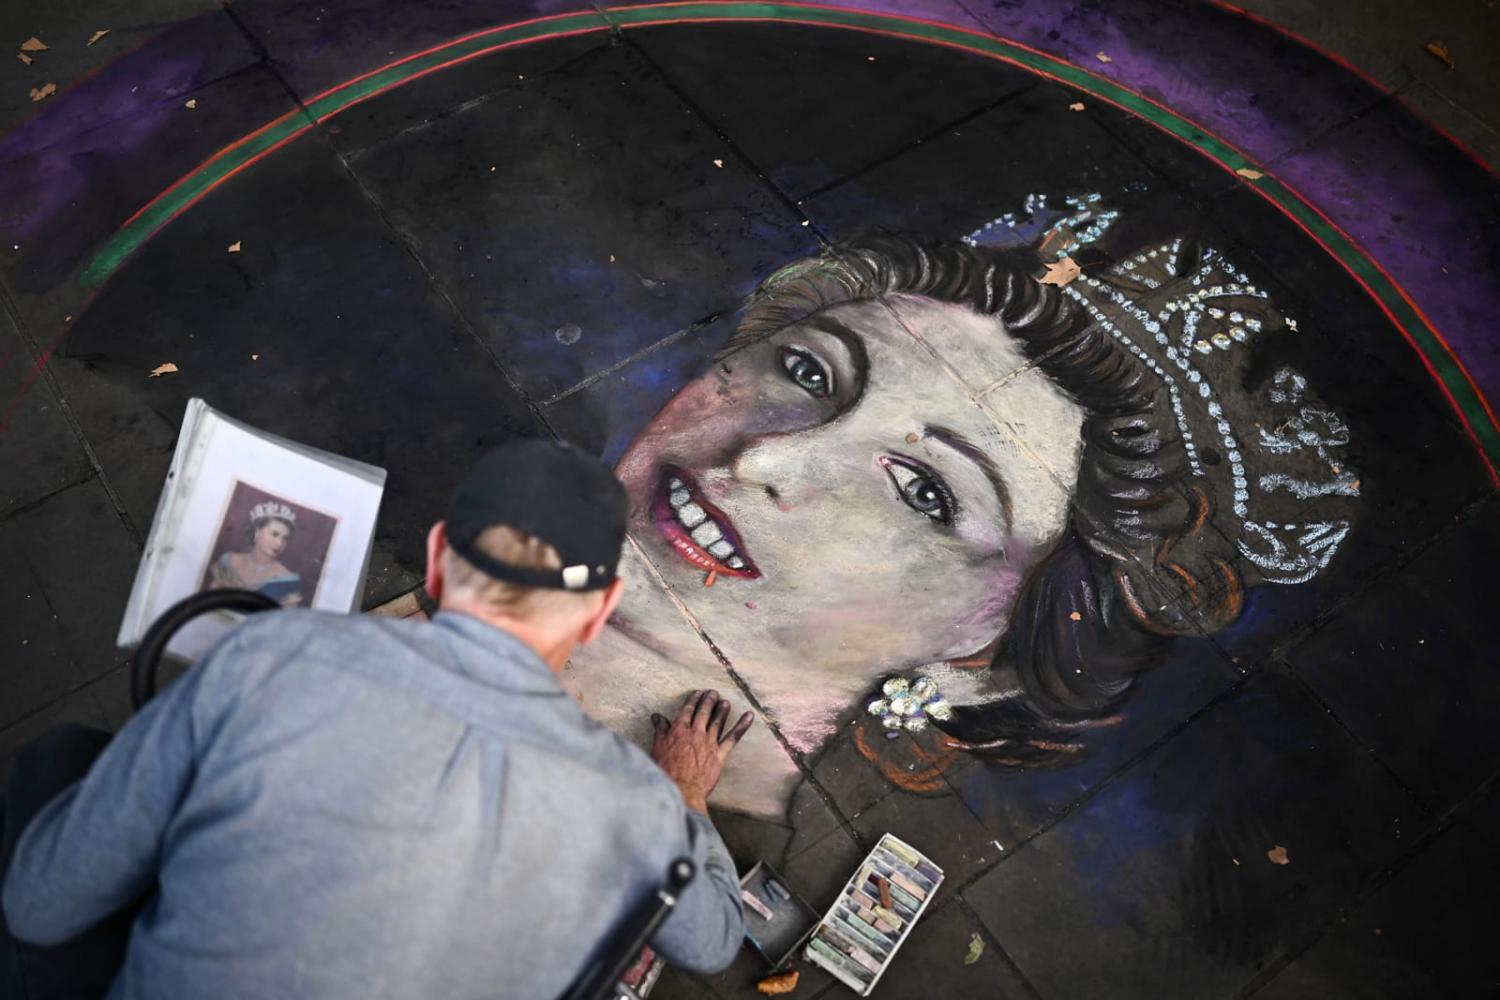 An artist draws a portrait of Britain’s Queen Elizabeth II on tiles with chalk at Trafalgar Square in London (Marco Bertorello/AFP via Getty Images)